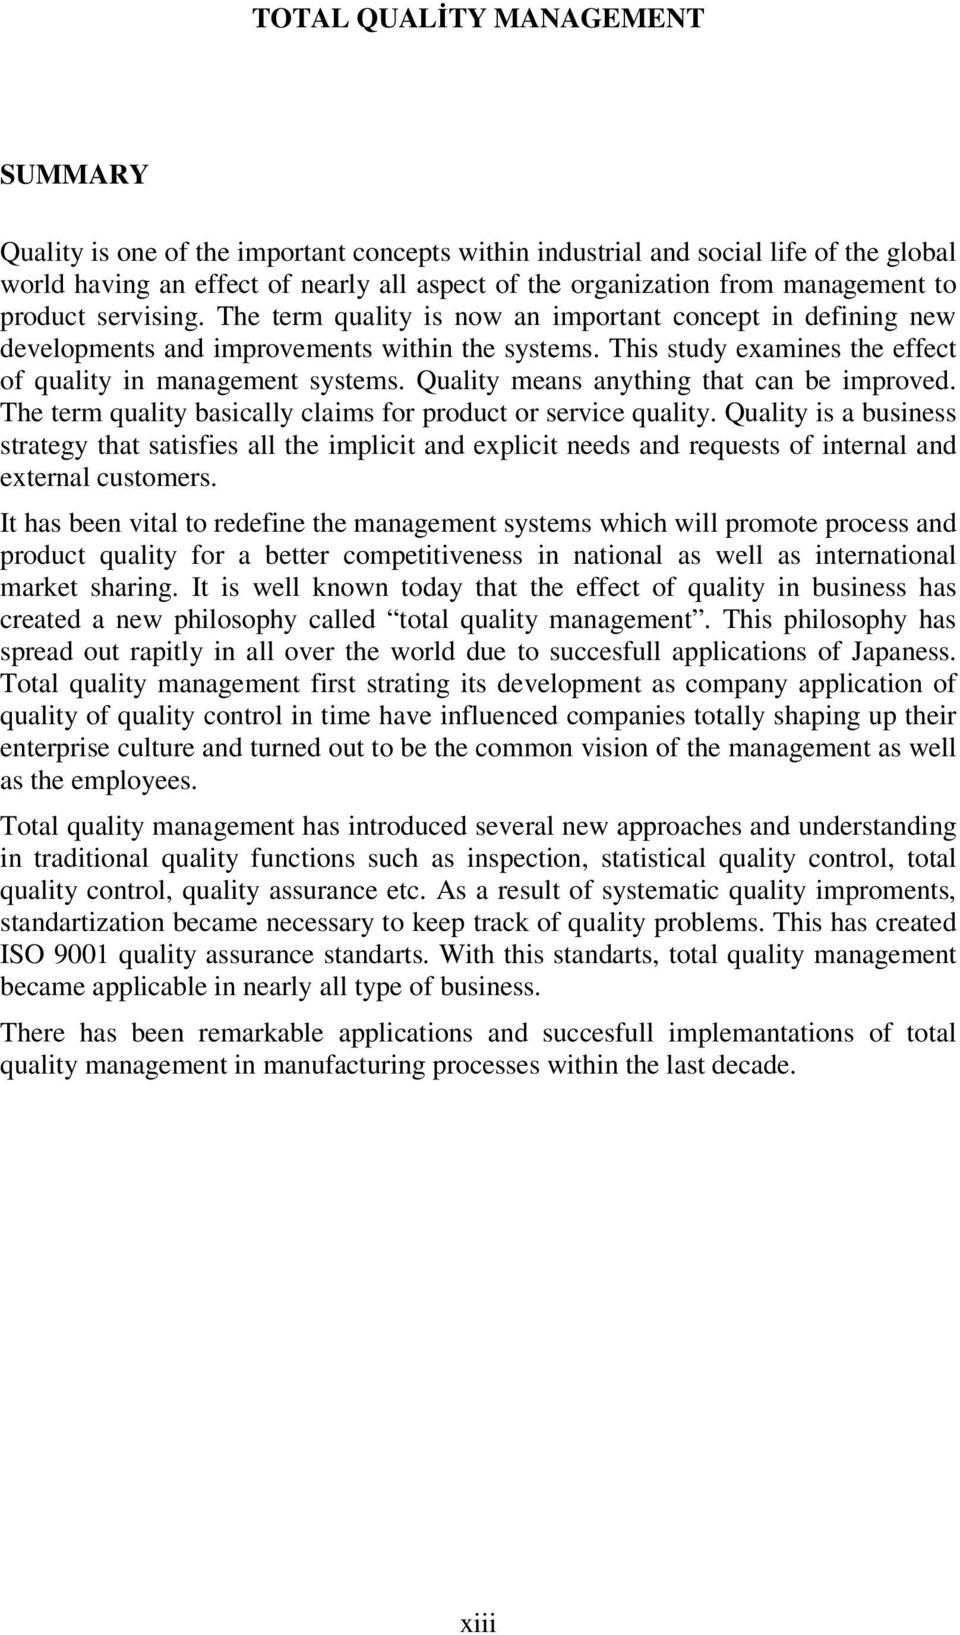 This study examines the effect of quality in management systems. Quality means anything that can be improved. The term quality basically claims for product or service quality.